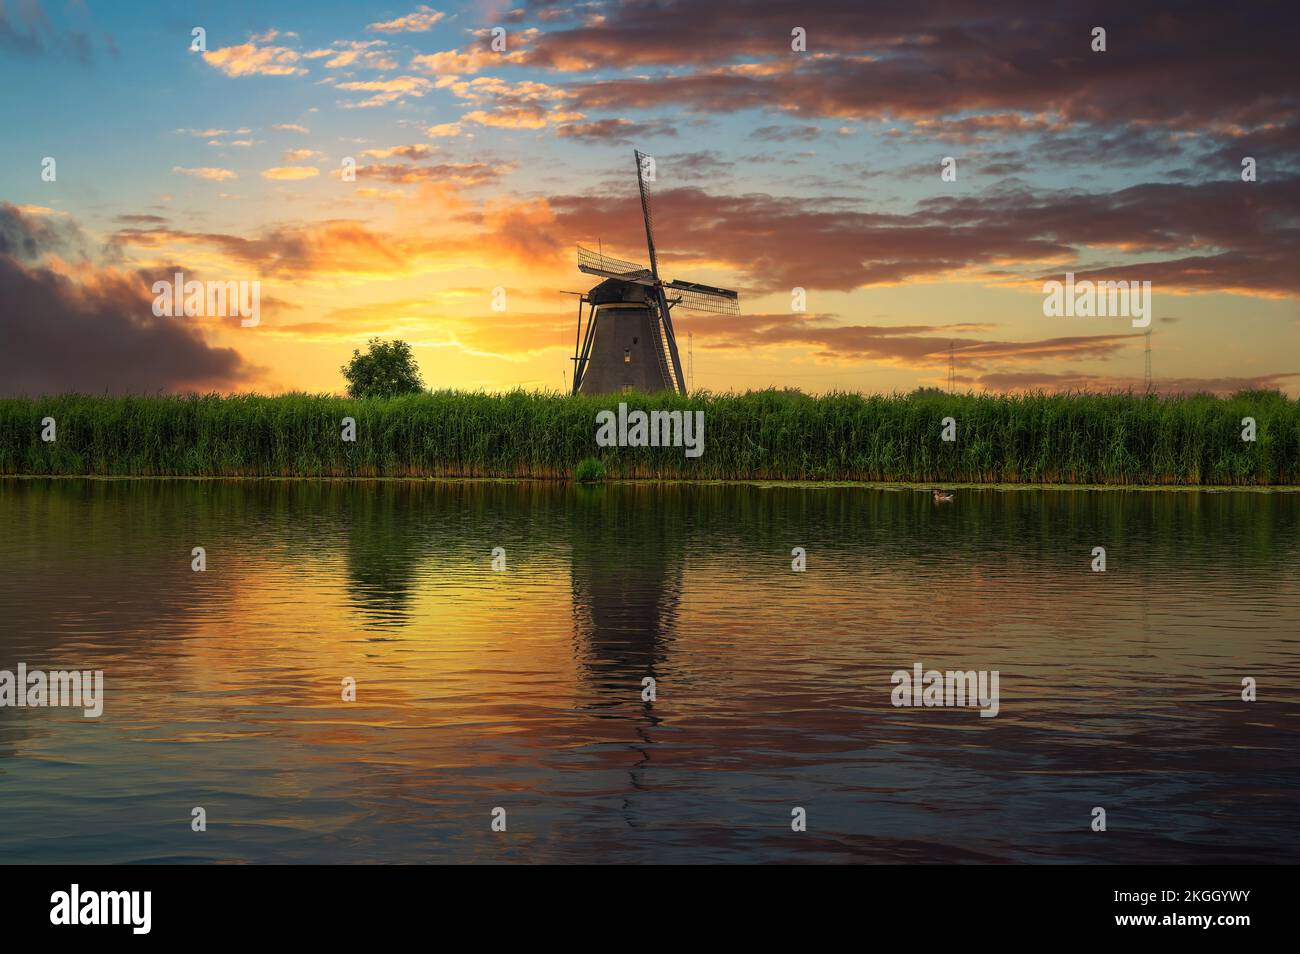 Sunset over an old dutch windmill by a river in Kinderdijk, Netherlands Stock Photo